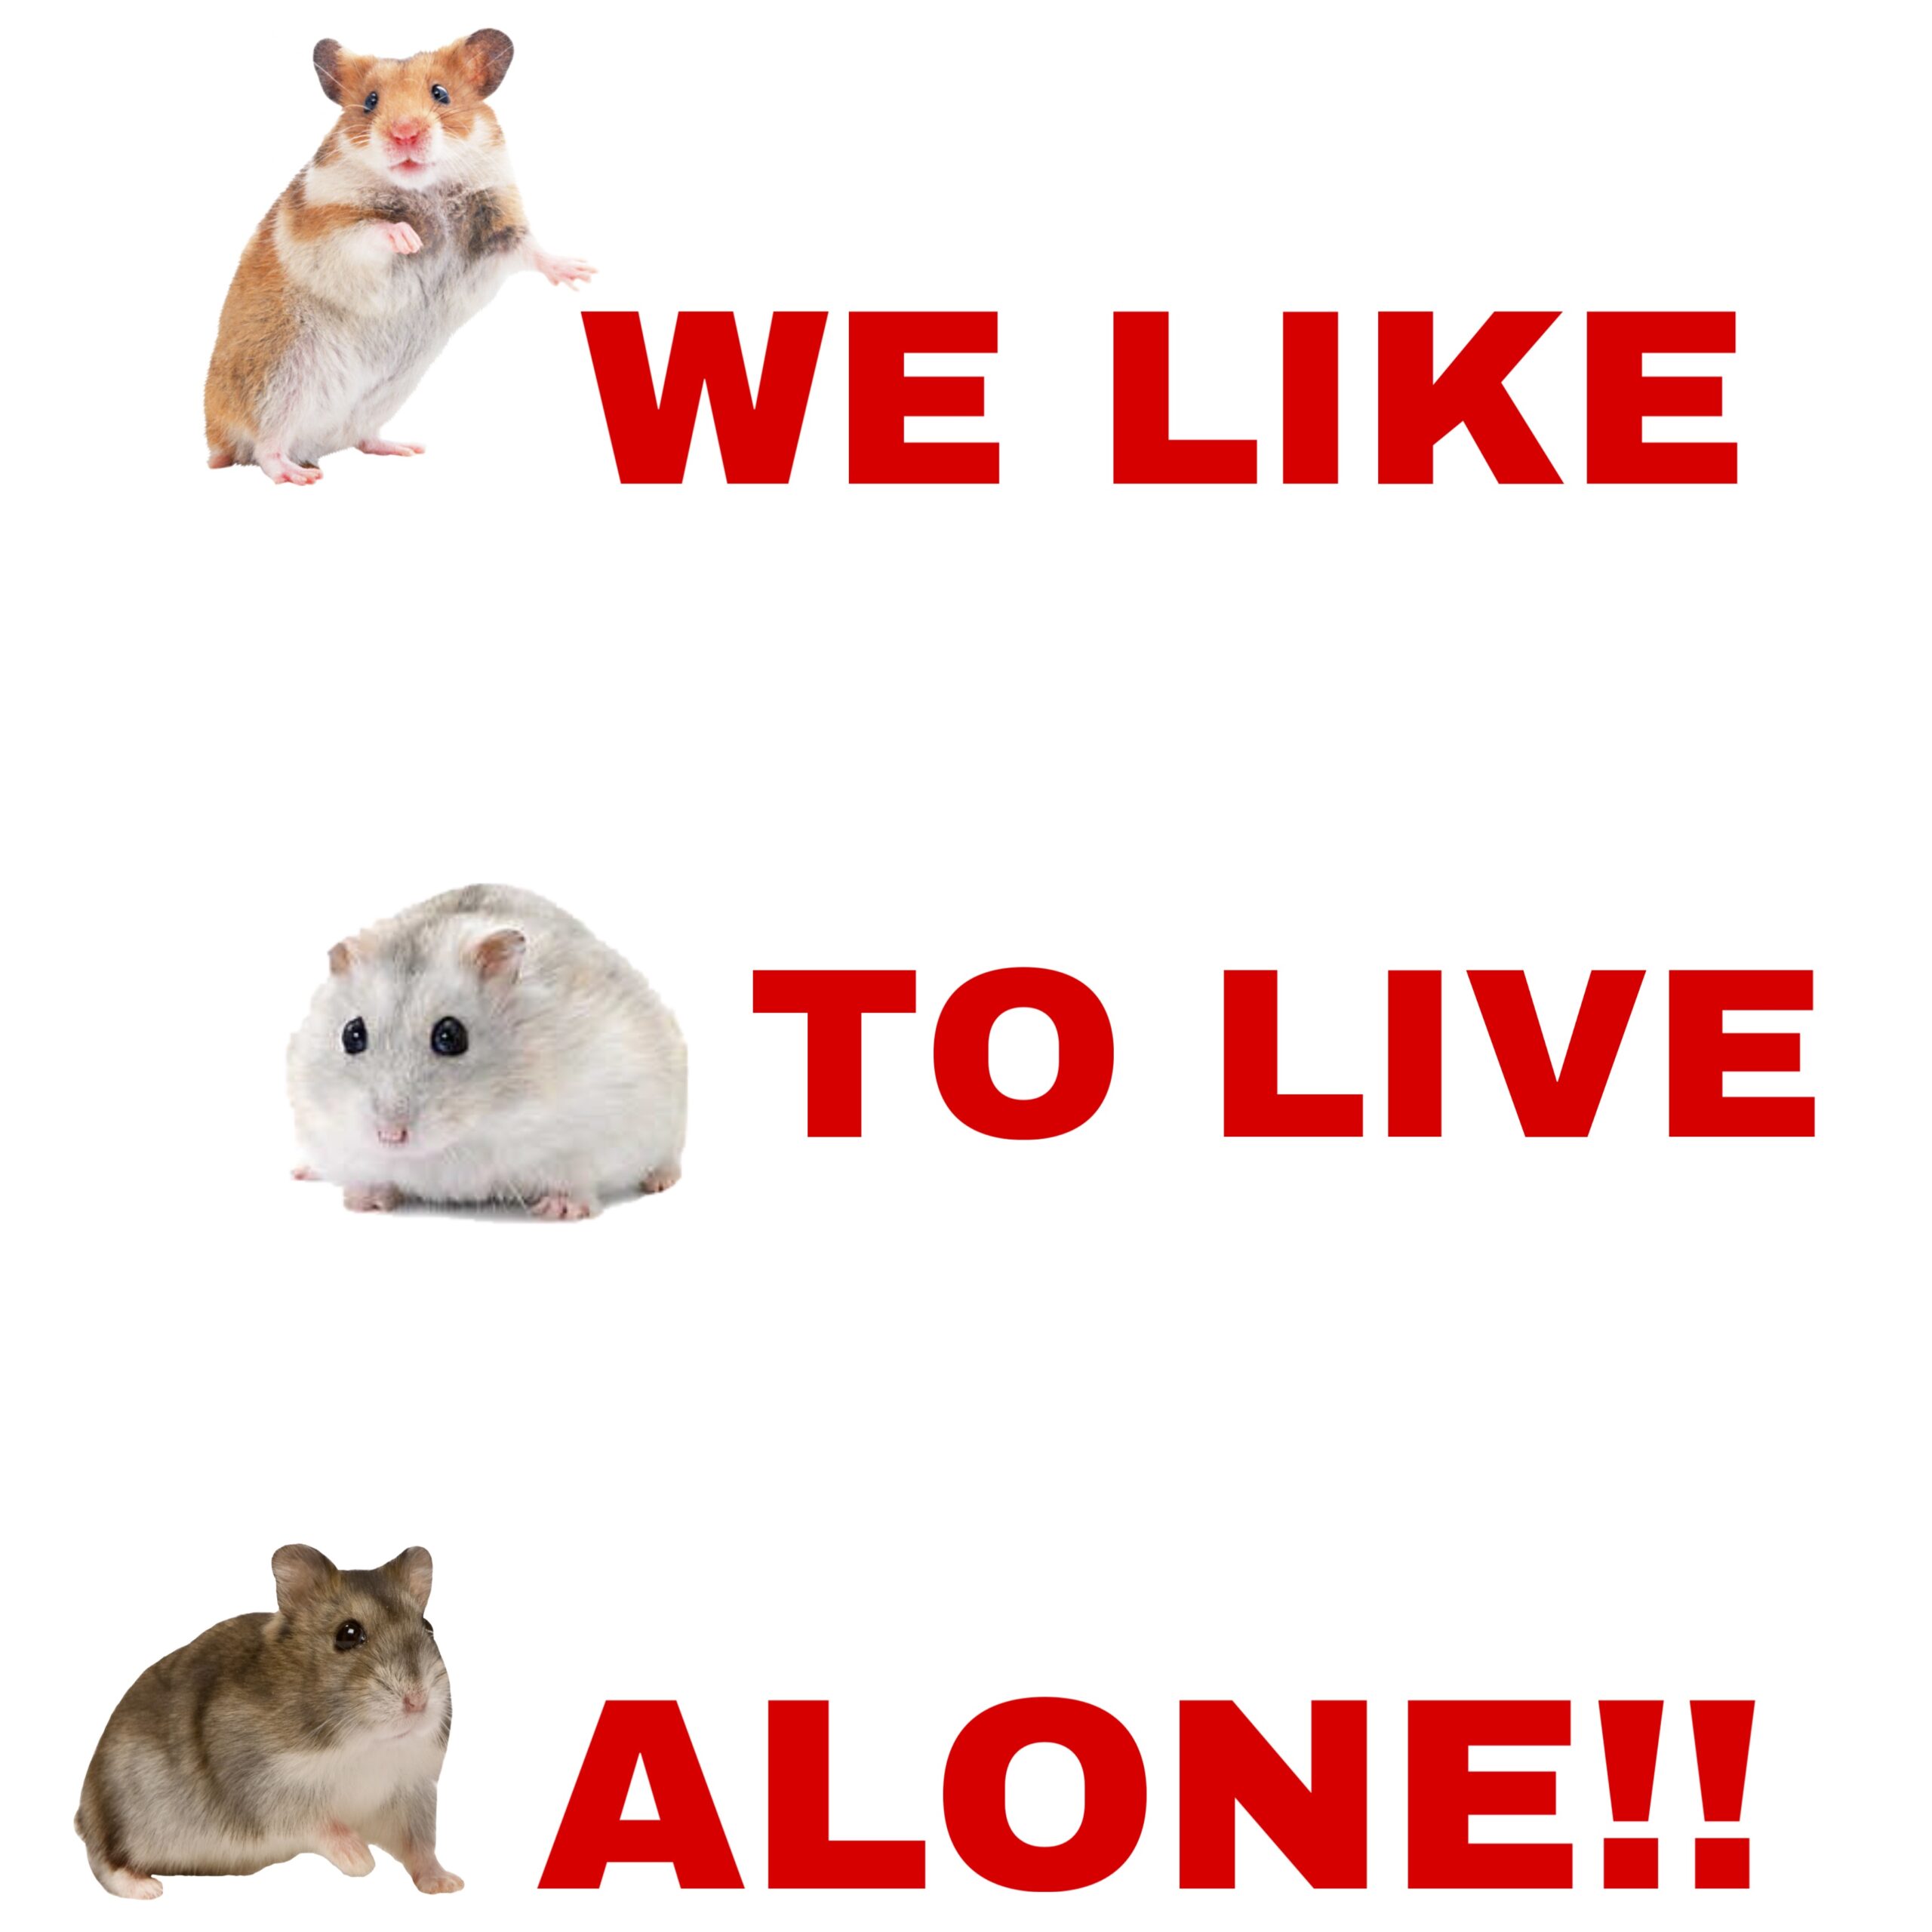 All types of Hamsters Like to Live Alone poster